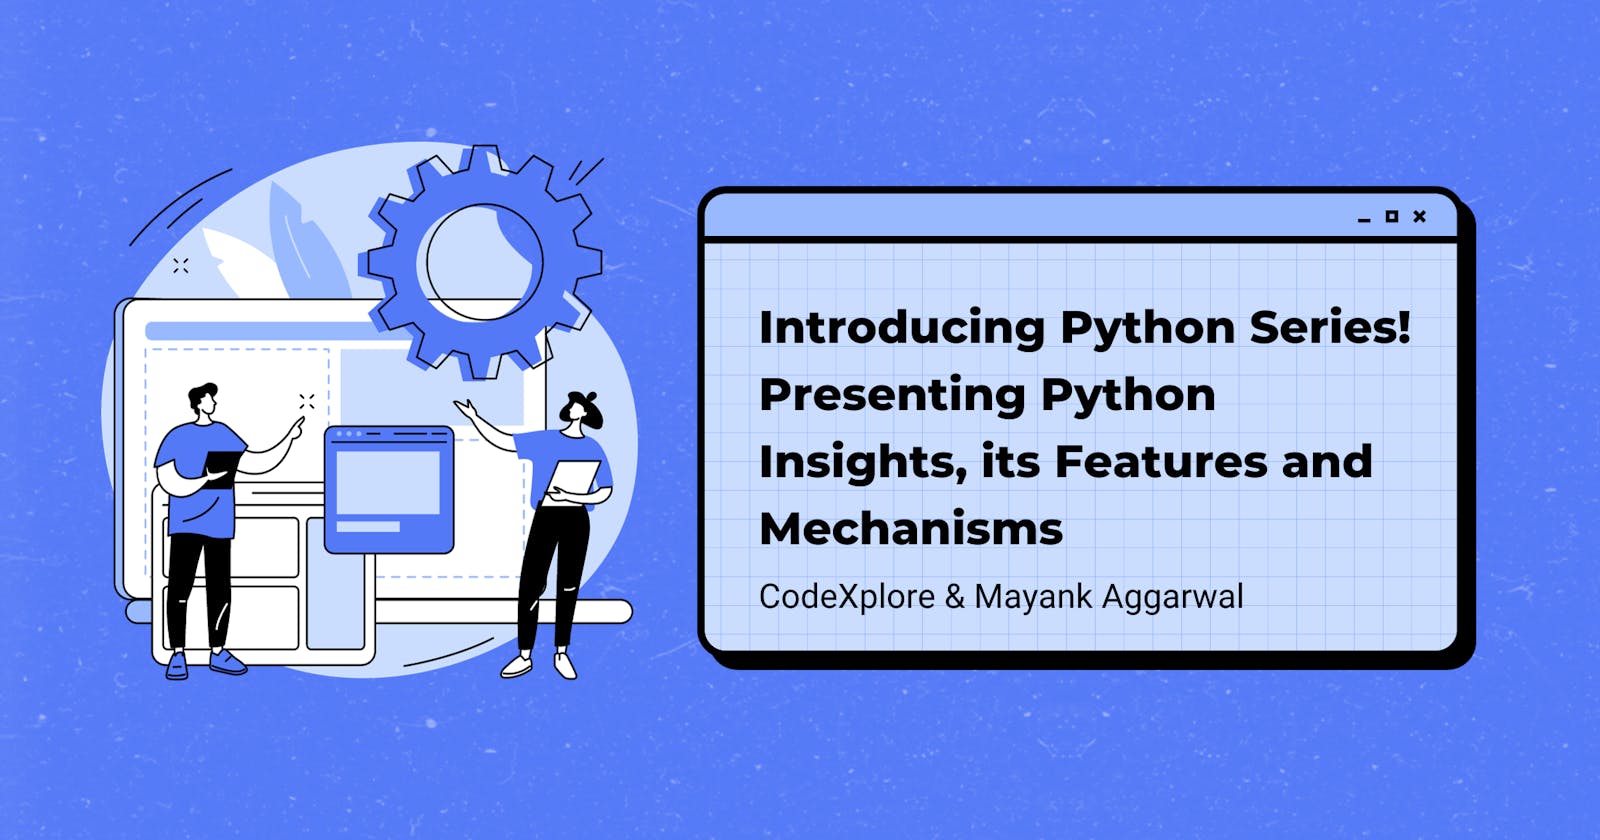 Thrilling Announcement! Presenting the Latest Python Insights, its Features, and Mechanisms 🎉